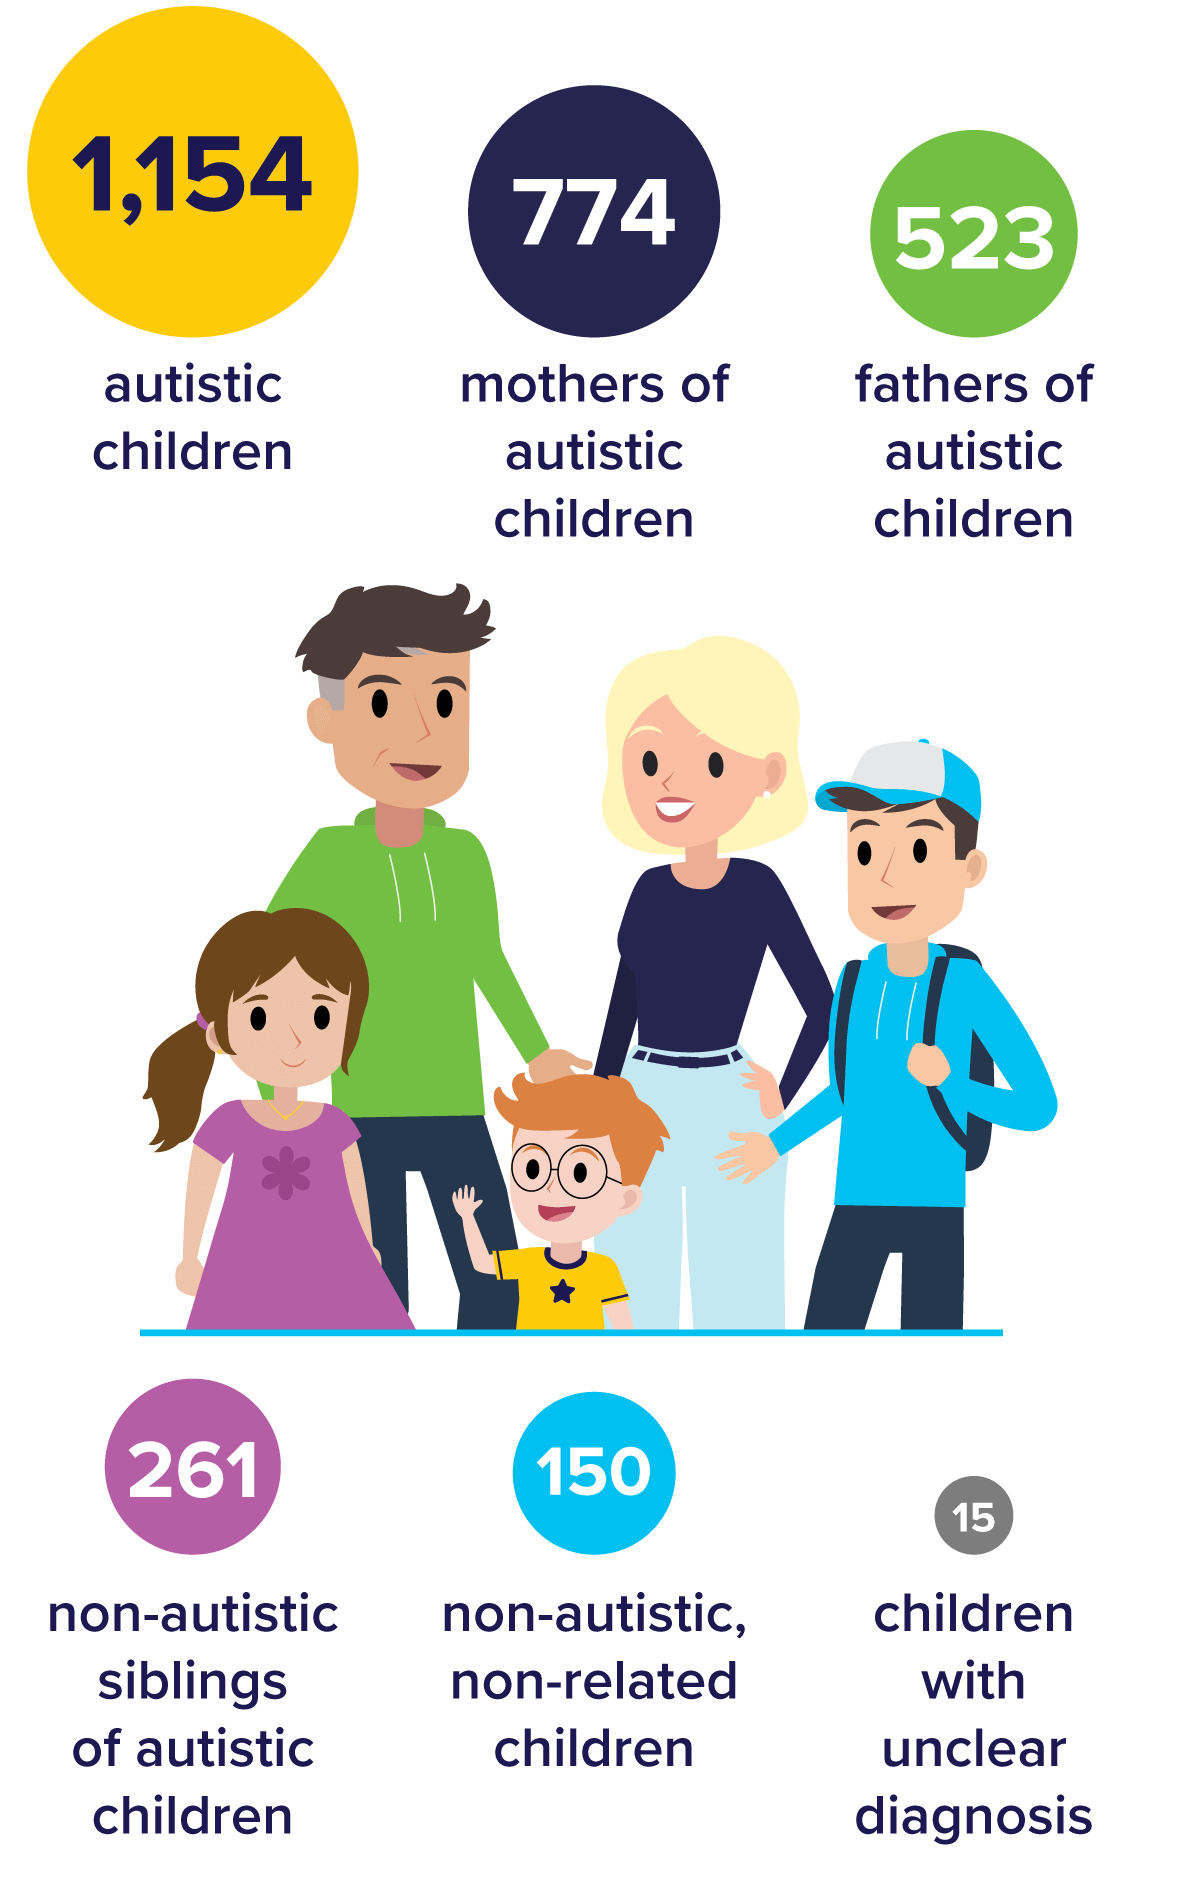 Infographic of family with bubbles showing the the demographics of the Biobank: 1154 autistic children, 774 mothers of autistic children, 523 fathers of autistic children, 261 non-autistic siblings of autistic children, 150 non-autistic, non-related children, 15 children with unclear diagnosis.